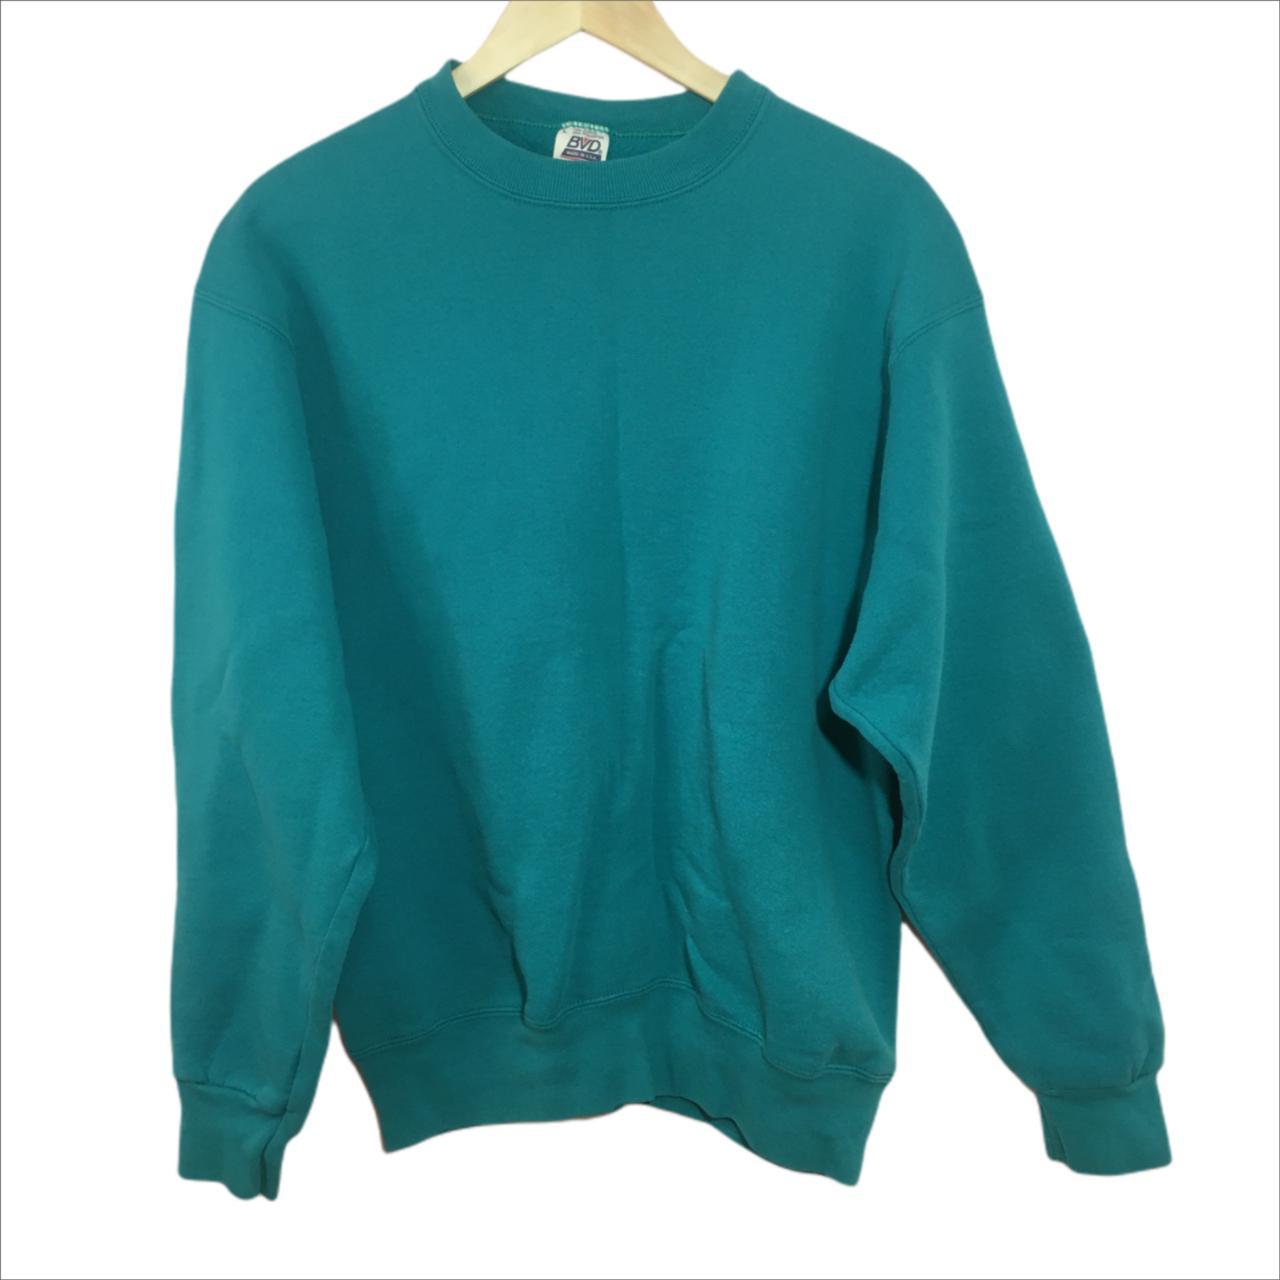 Product Image 1 - L Vintage 80s/90s Blank BVD